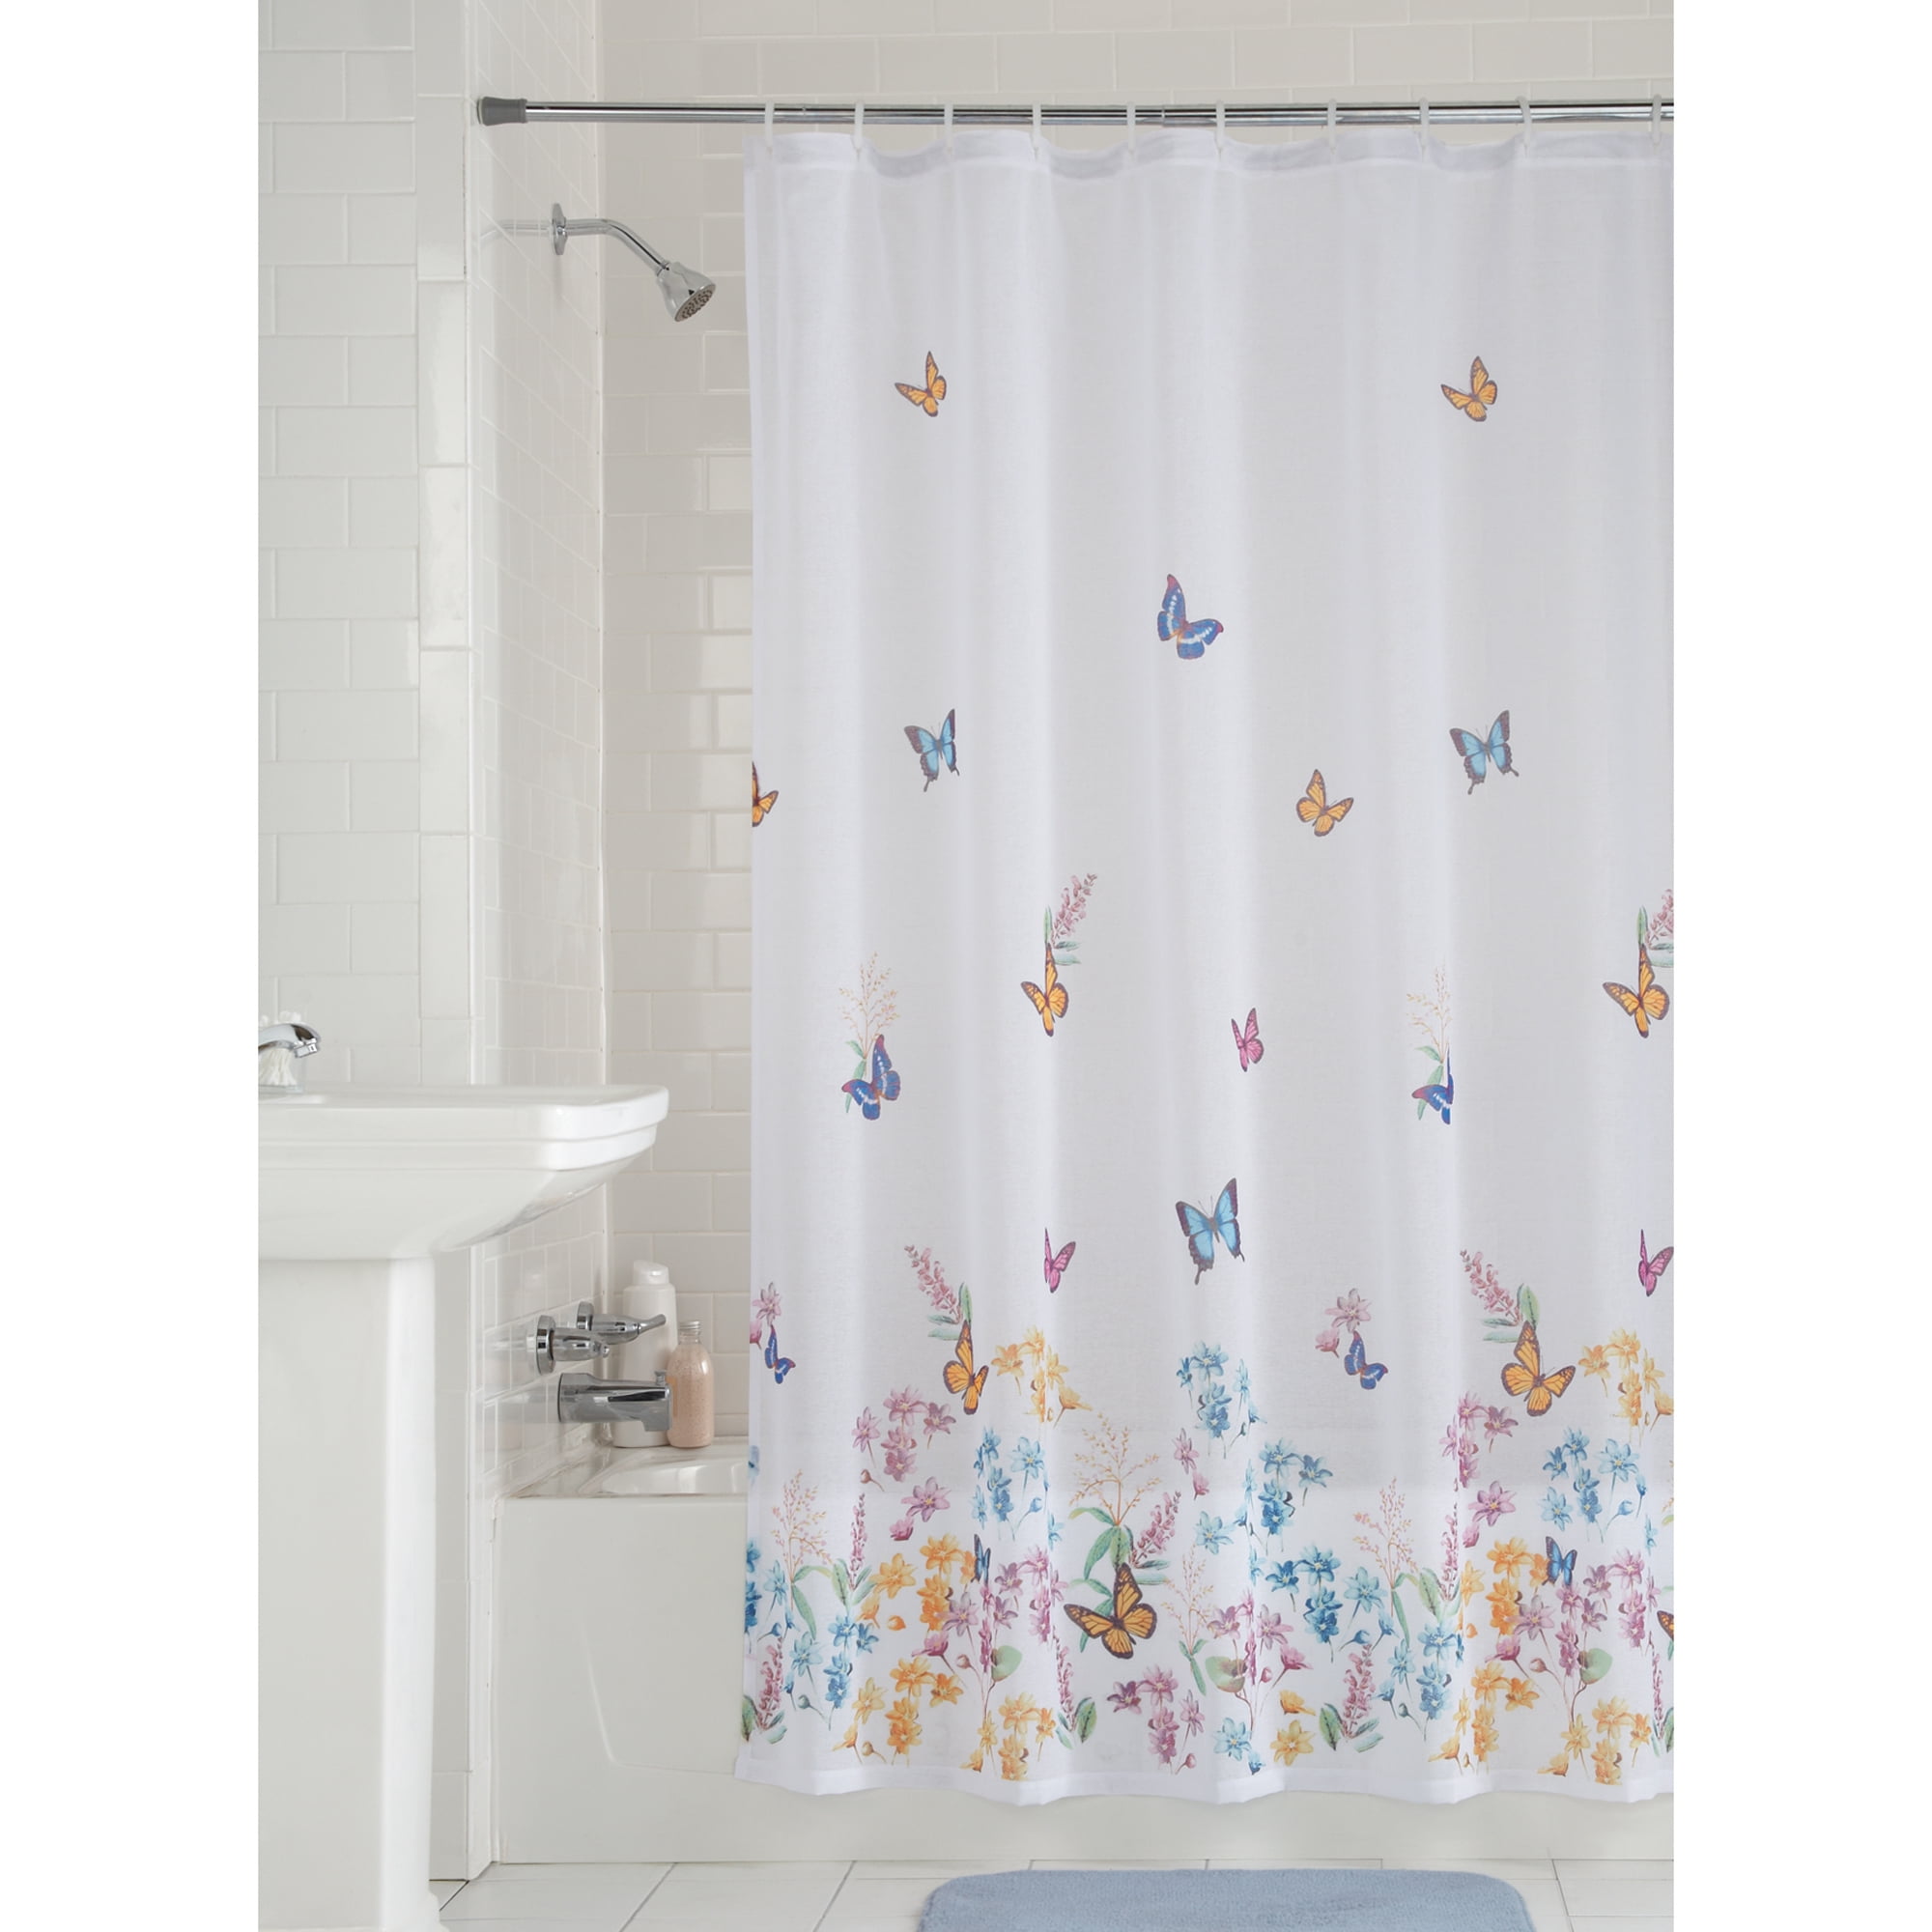 Fly Spring Pink Butterfly Fabric Shower Curtain with 12 Resin Shower Rings 